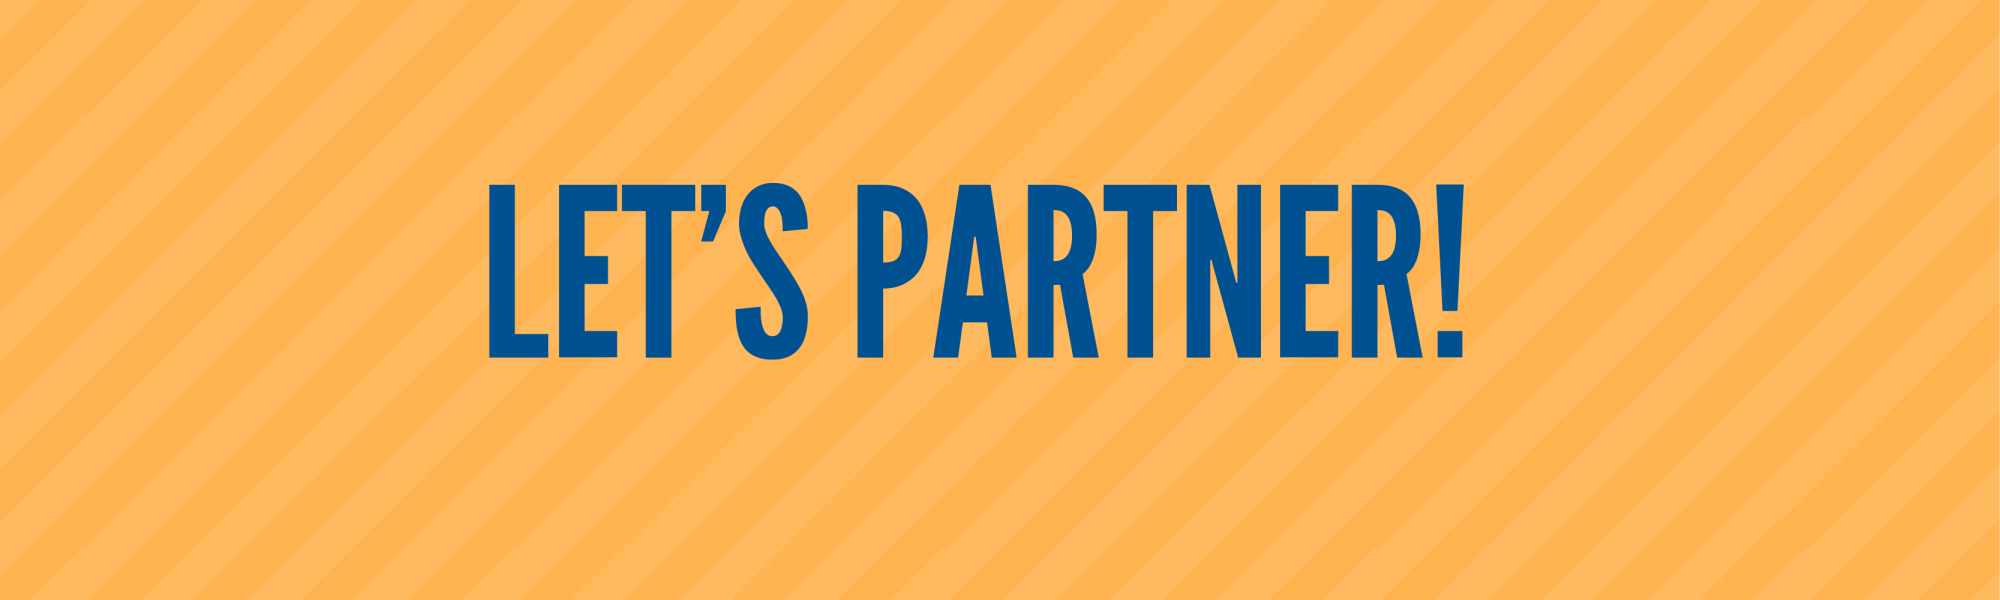 On top of a yellow-striped background, blue text says, "Let's partner!"